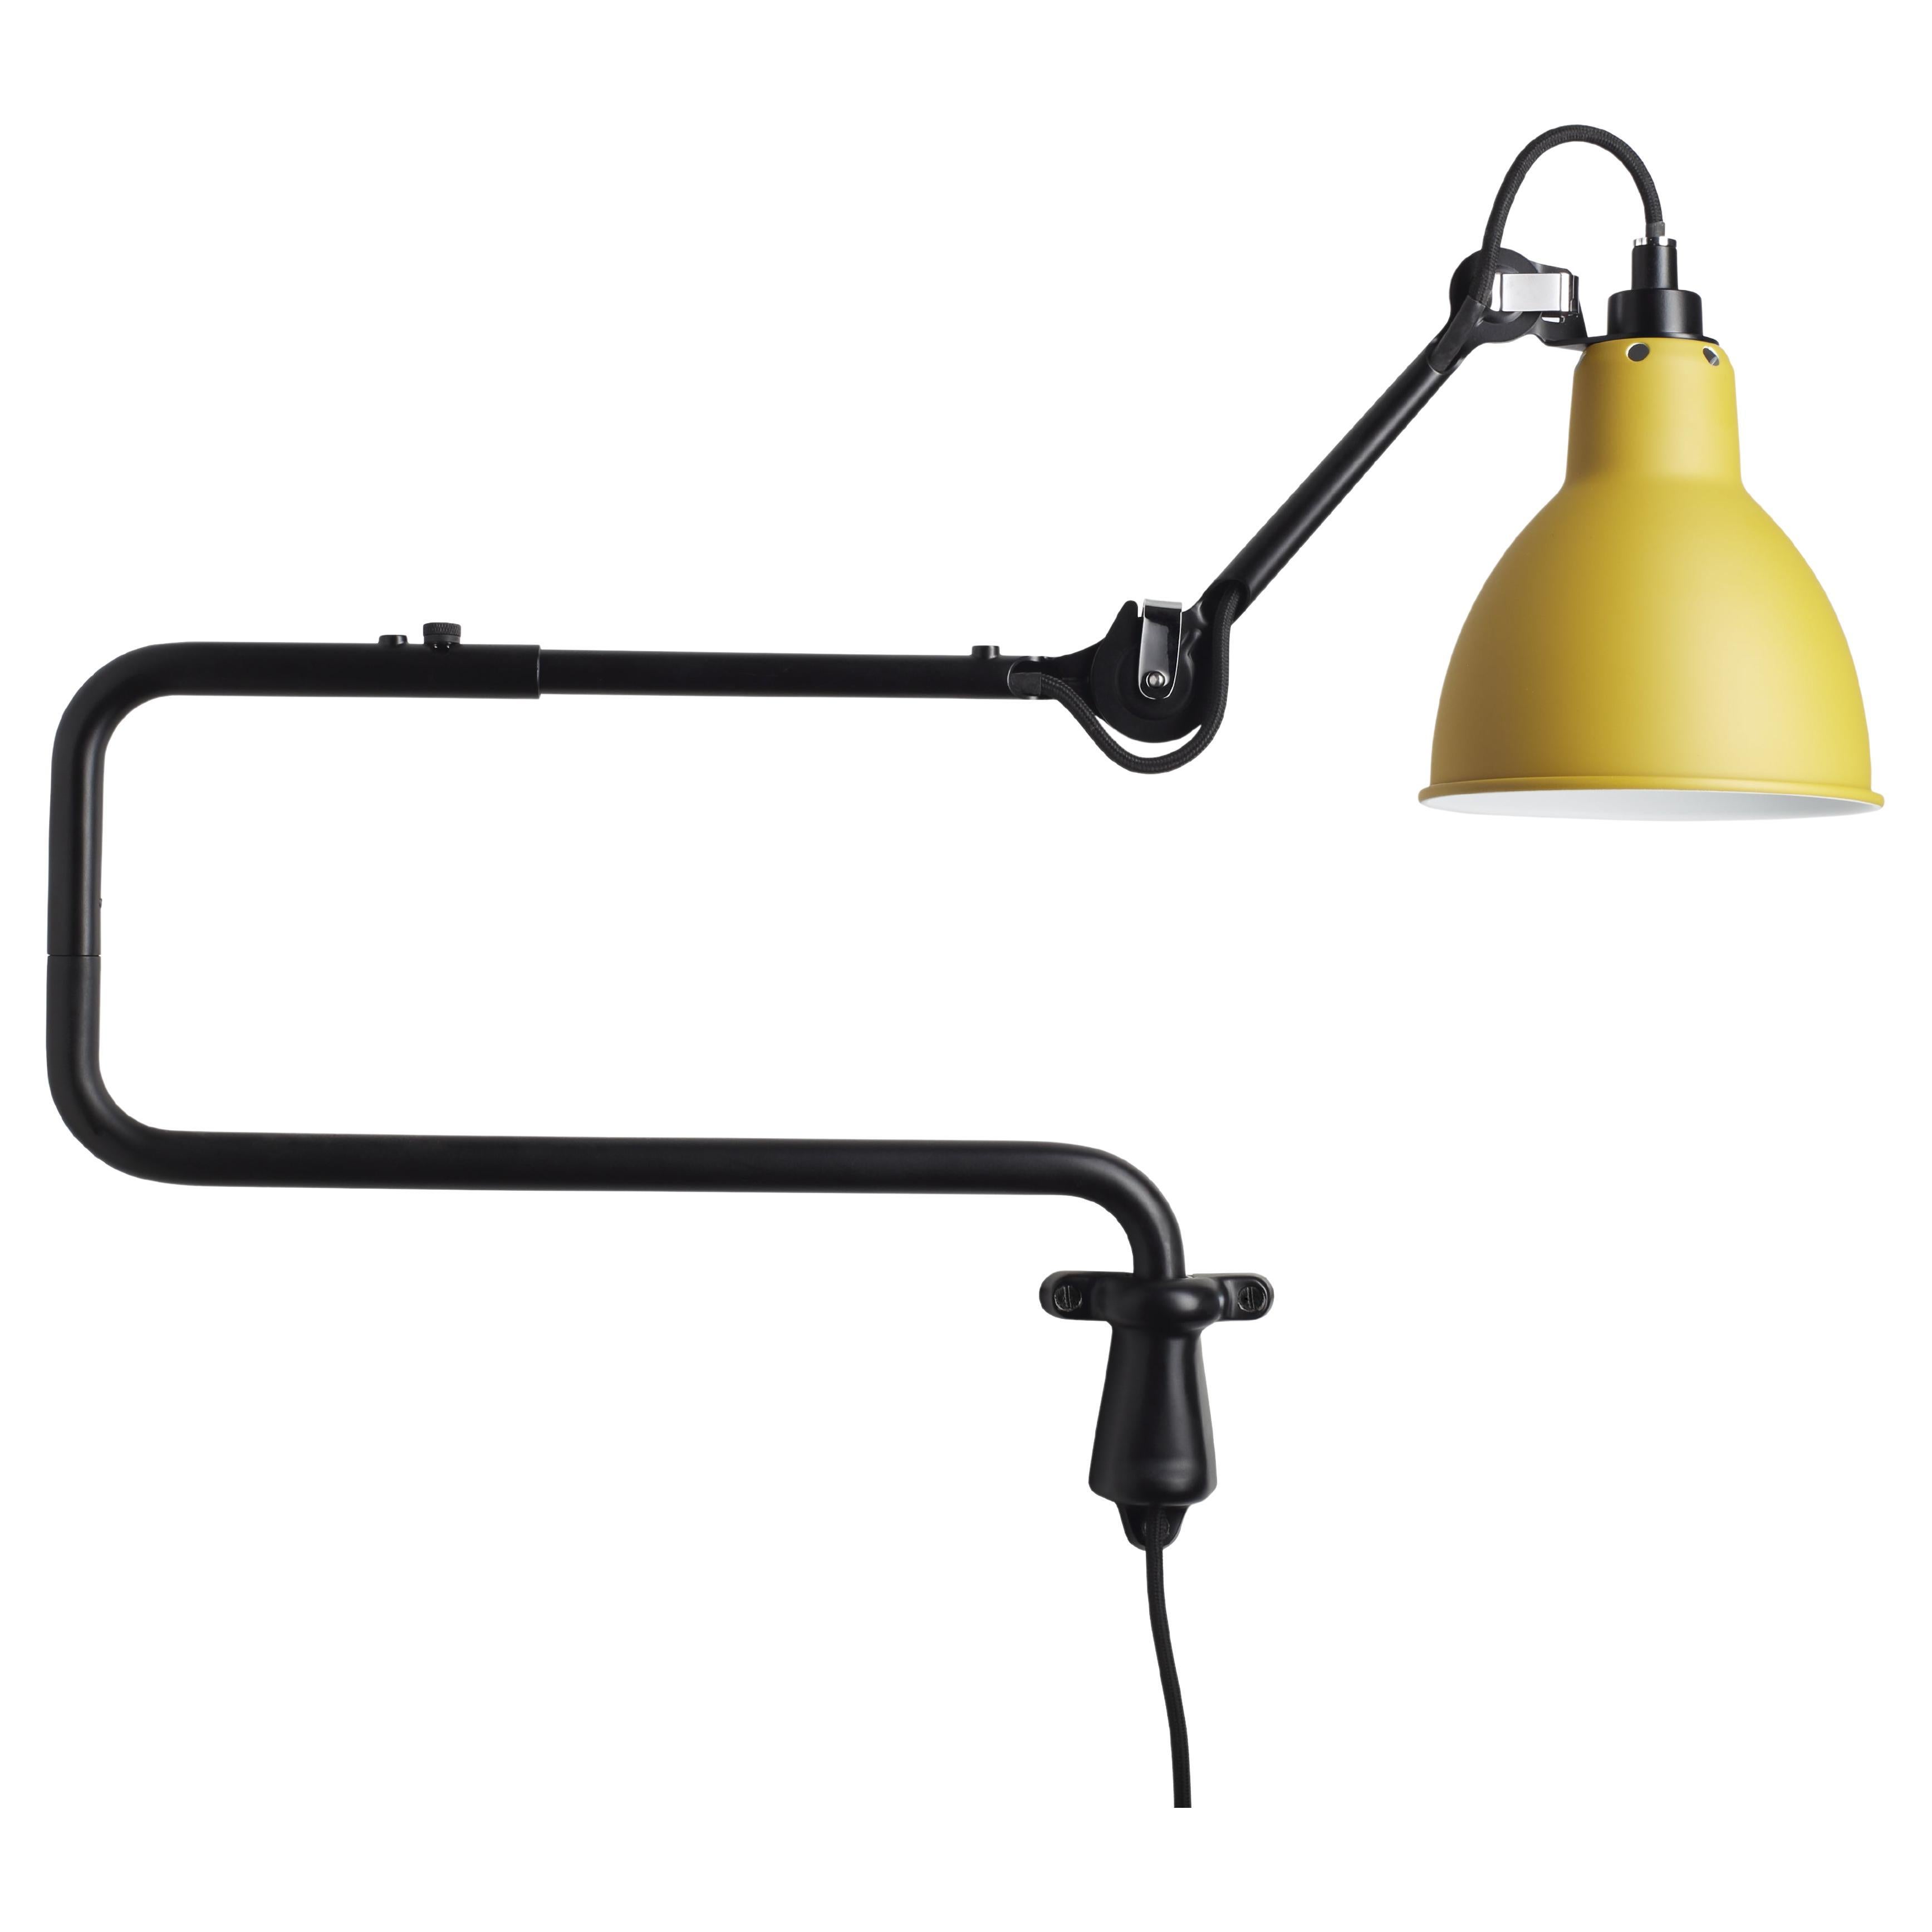 DCW Editions La Lampe Gras N°303 Wall Lamp in Black Arm and Yellow Shade